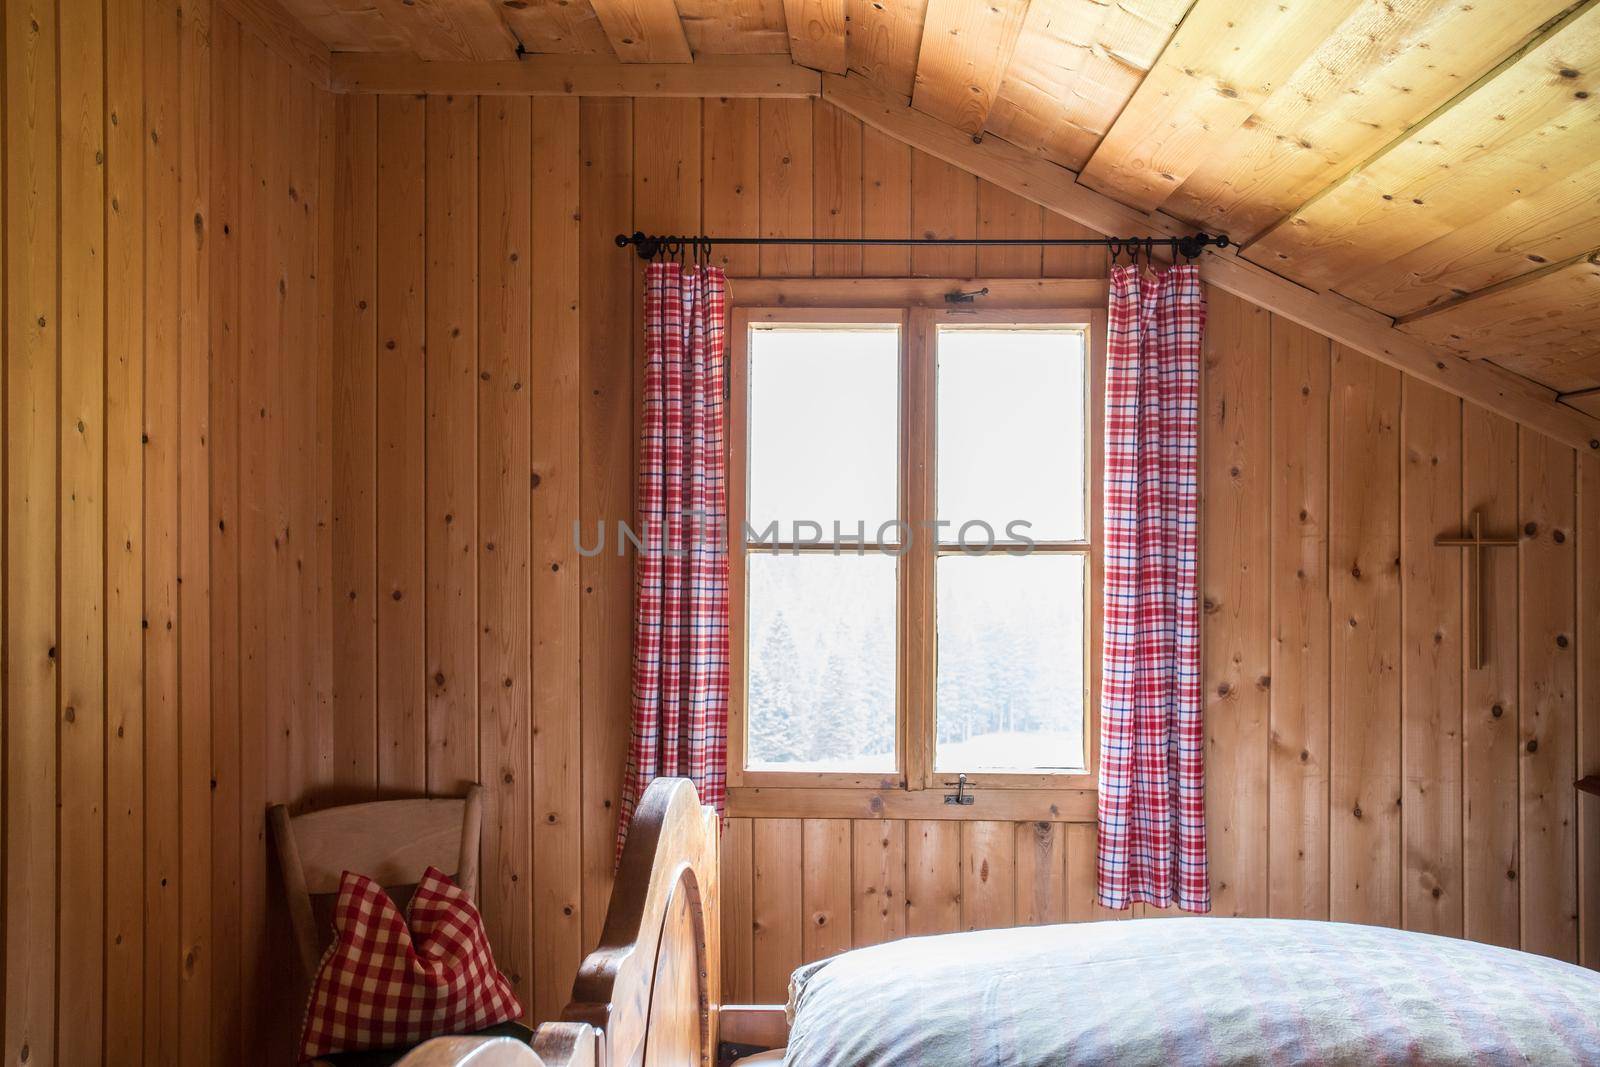 Holiday in the mountains: Rustic old wooden interior of a cabin or alpine hut by Daxenbichler